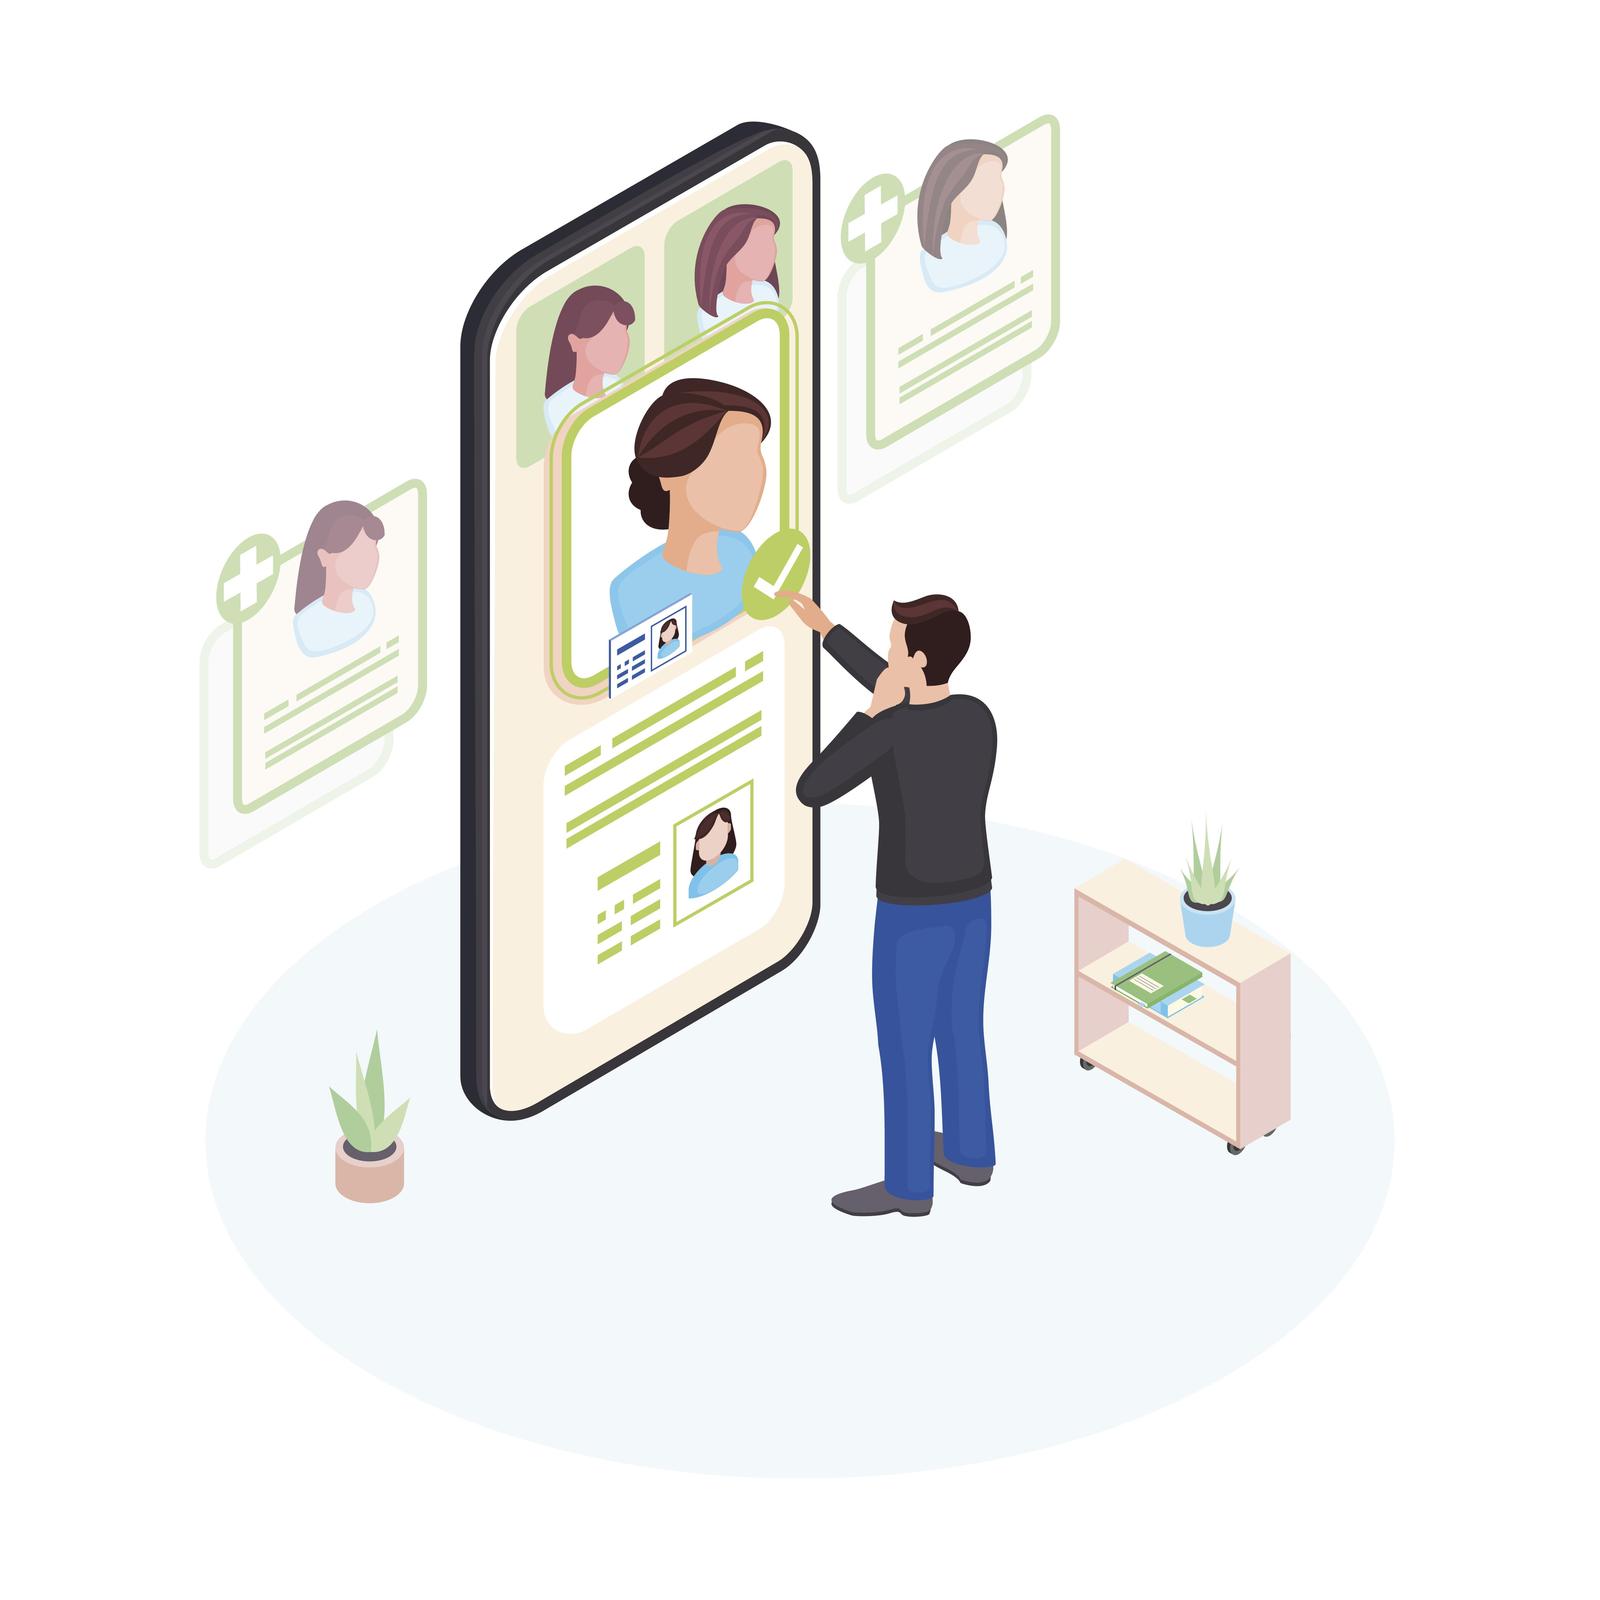 Choosing doctor online isometric illustration. Patient selecting physician profile on smartphone screen